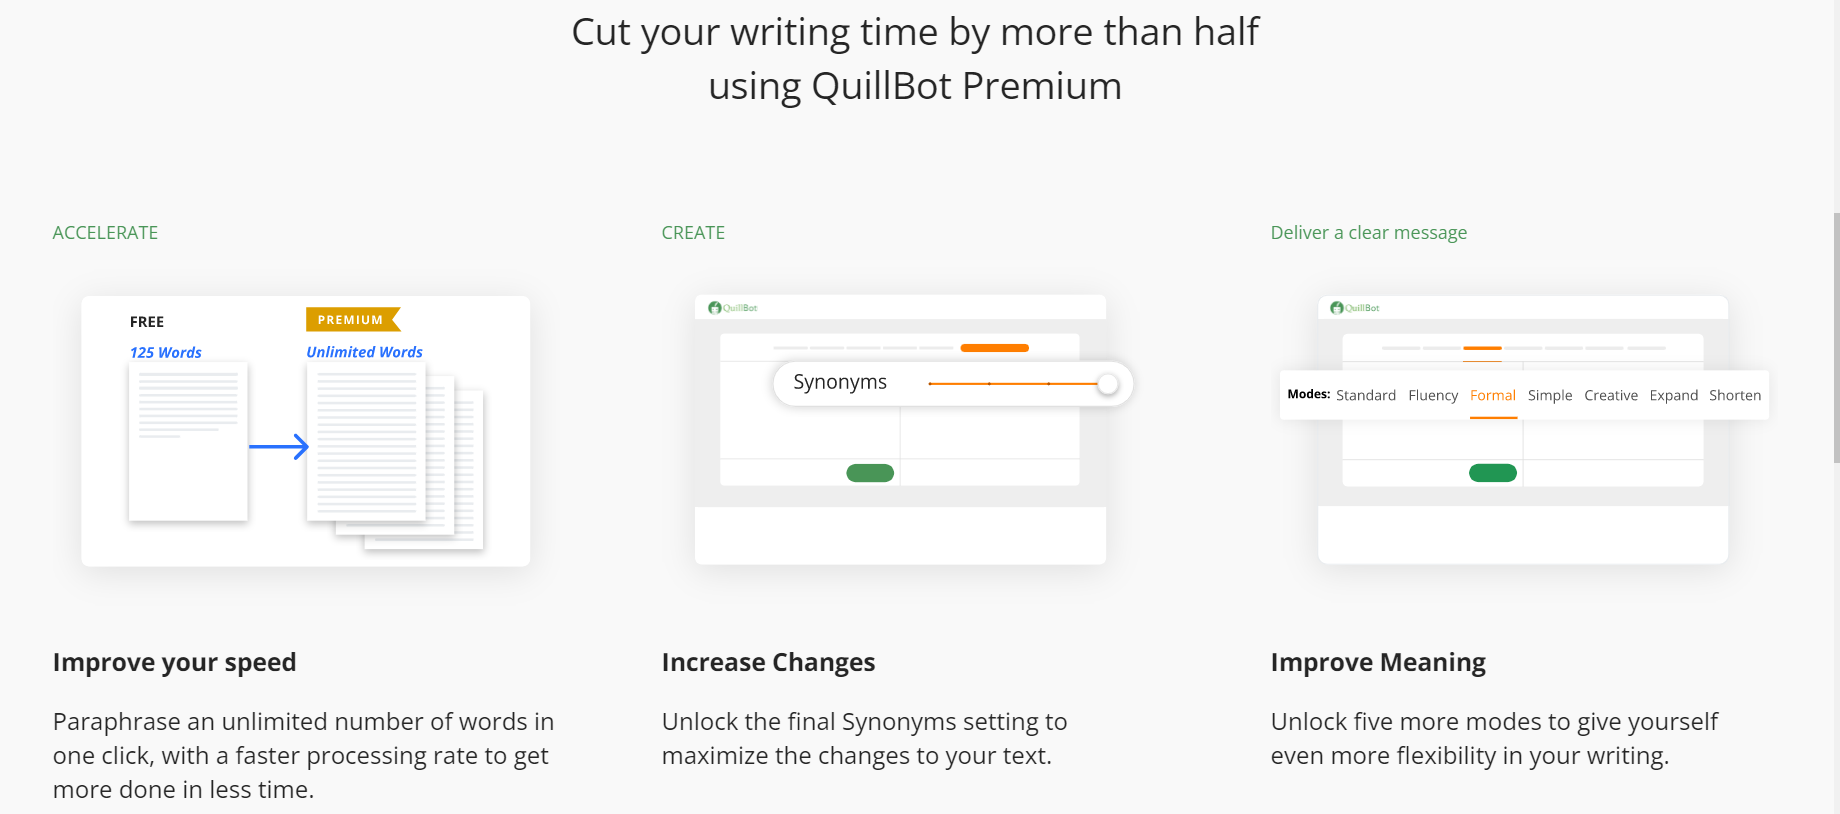 Quillbot Landing Page - "Cut your writing time by more than half using Quillbot Premium" 